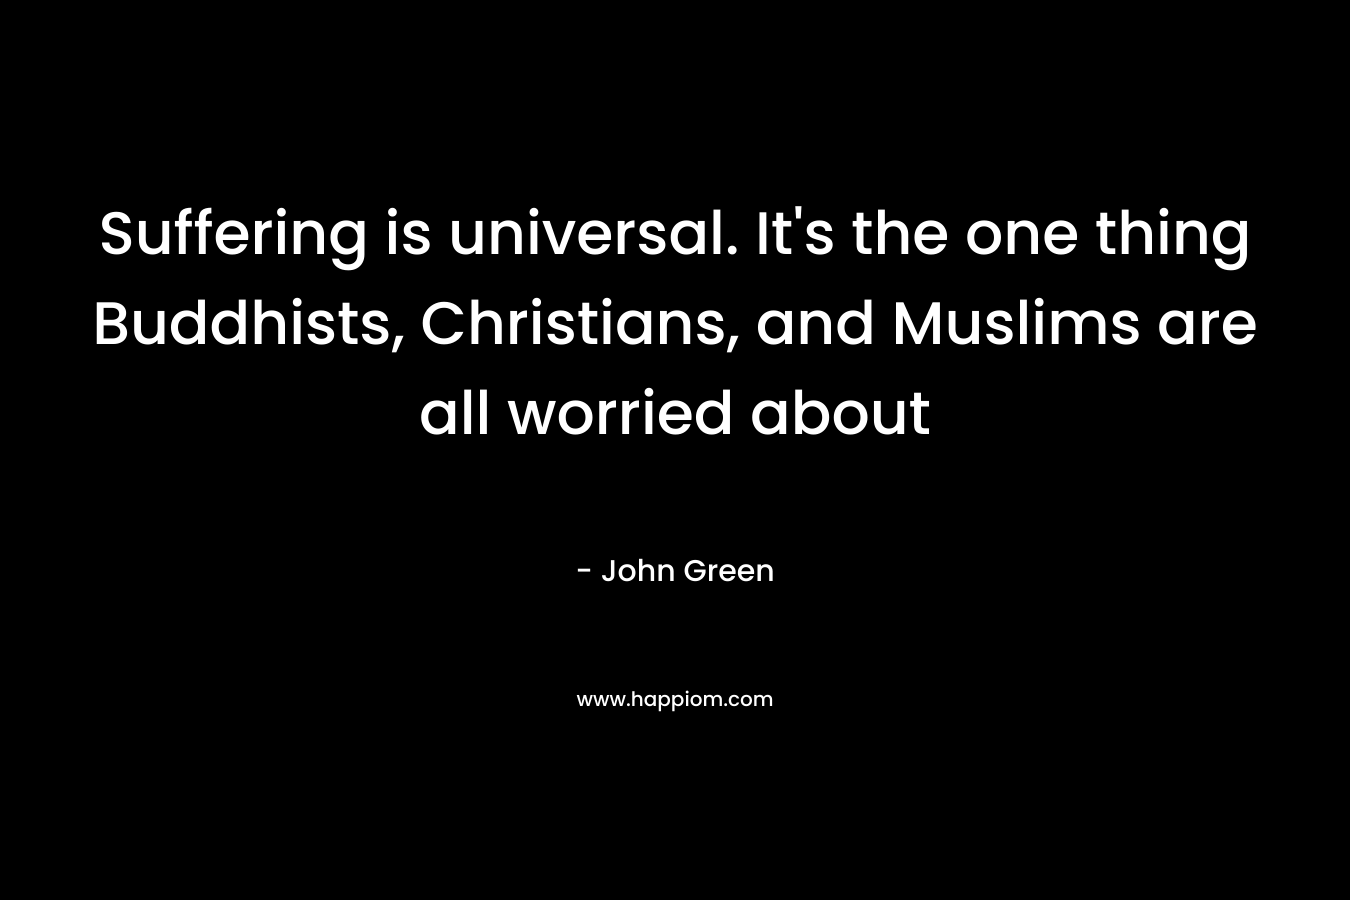 Suffering is universal. It’s the one thing Buddhists, Christians, and Muslims are all worried about – John Green